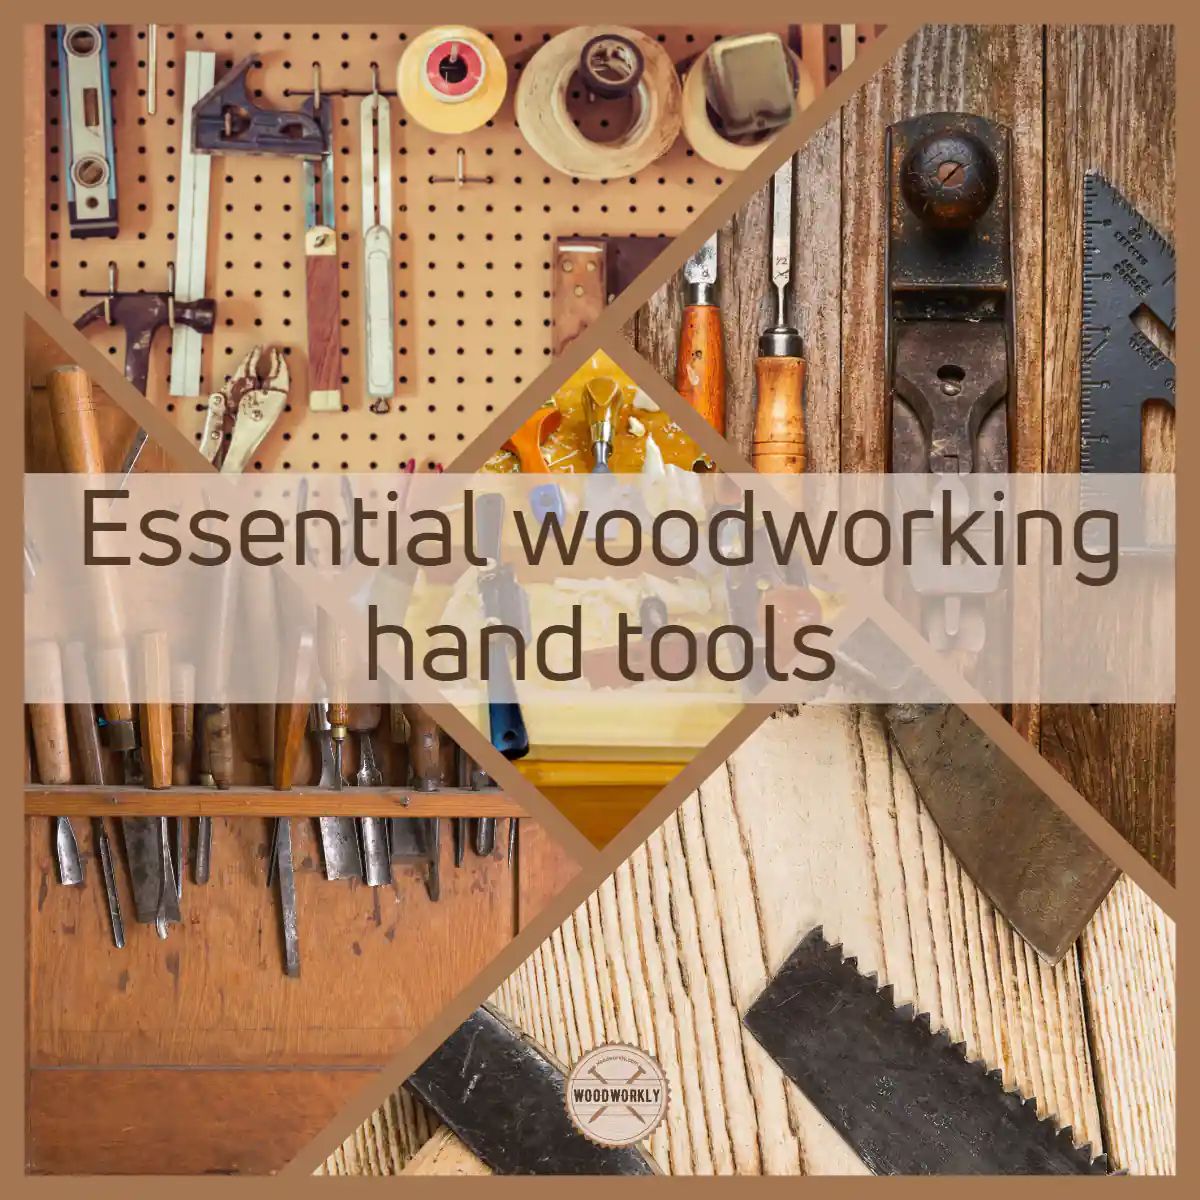 Essential woodworking hand tools